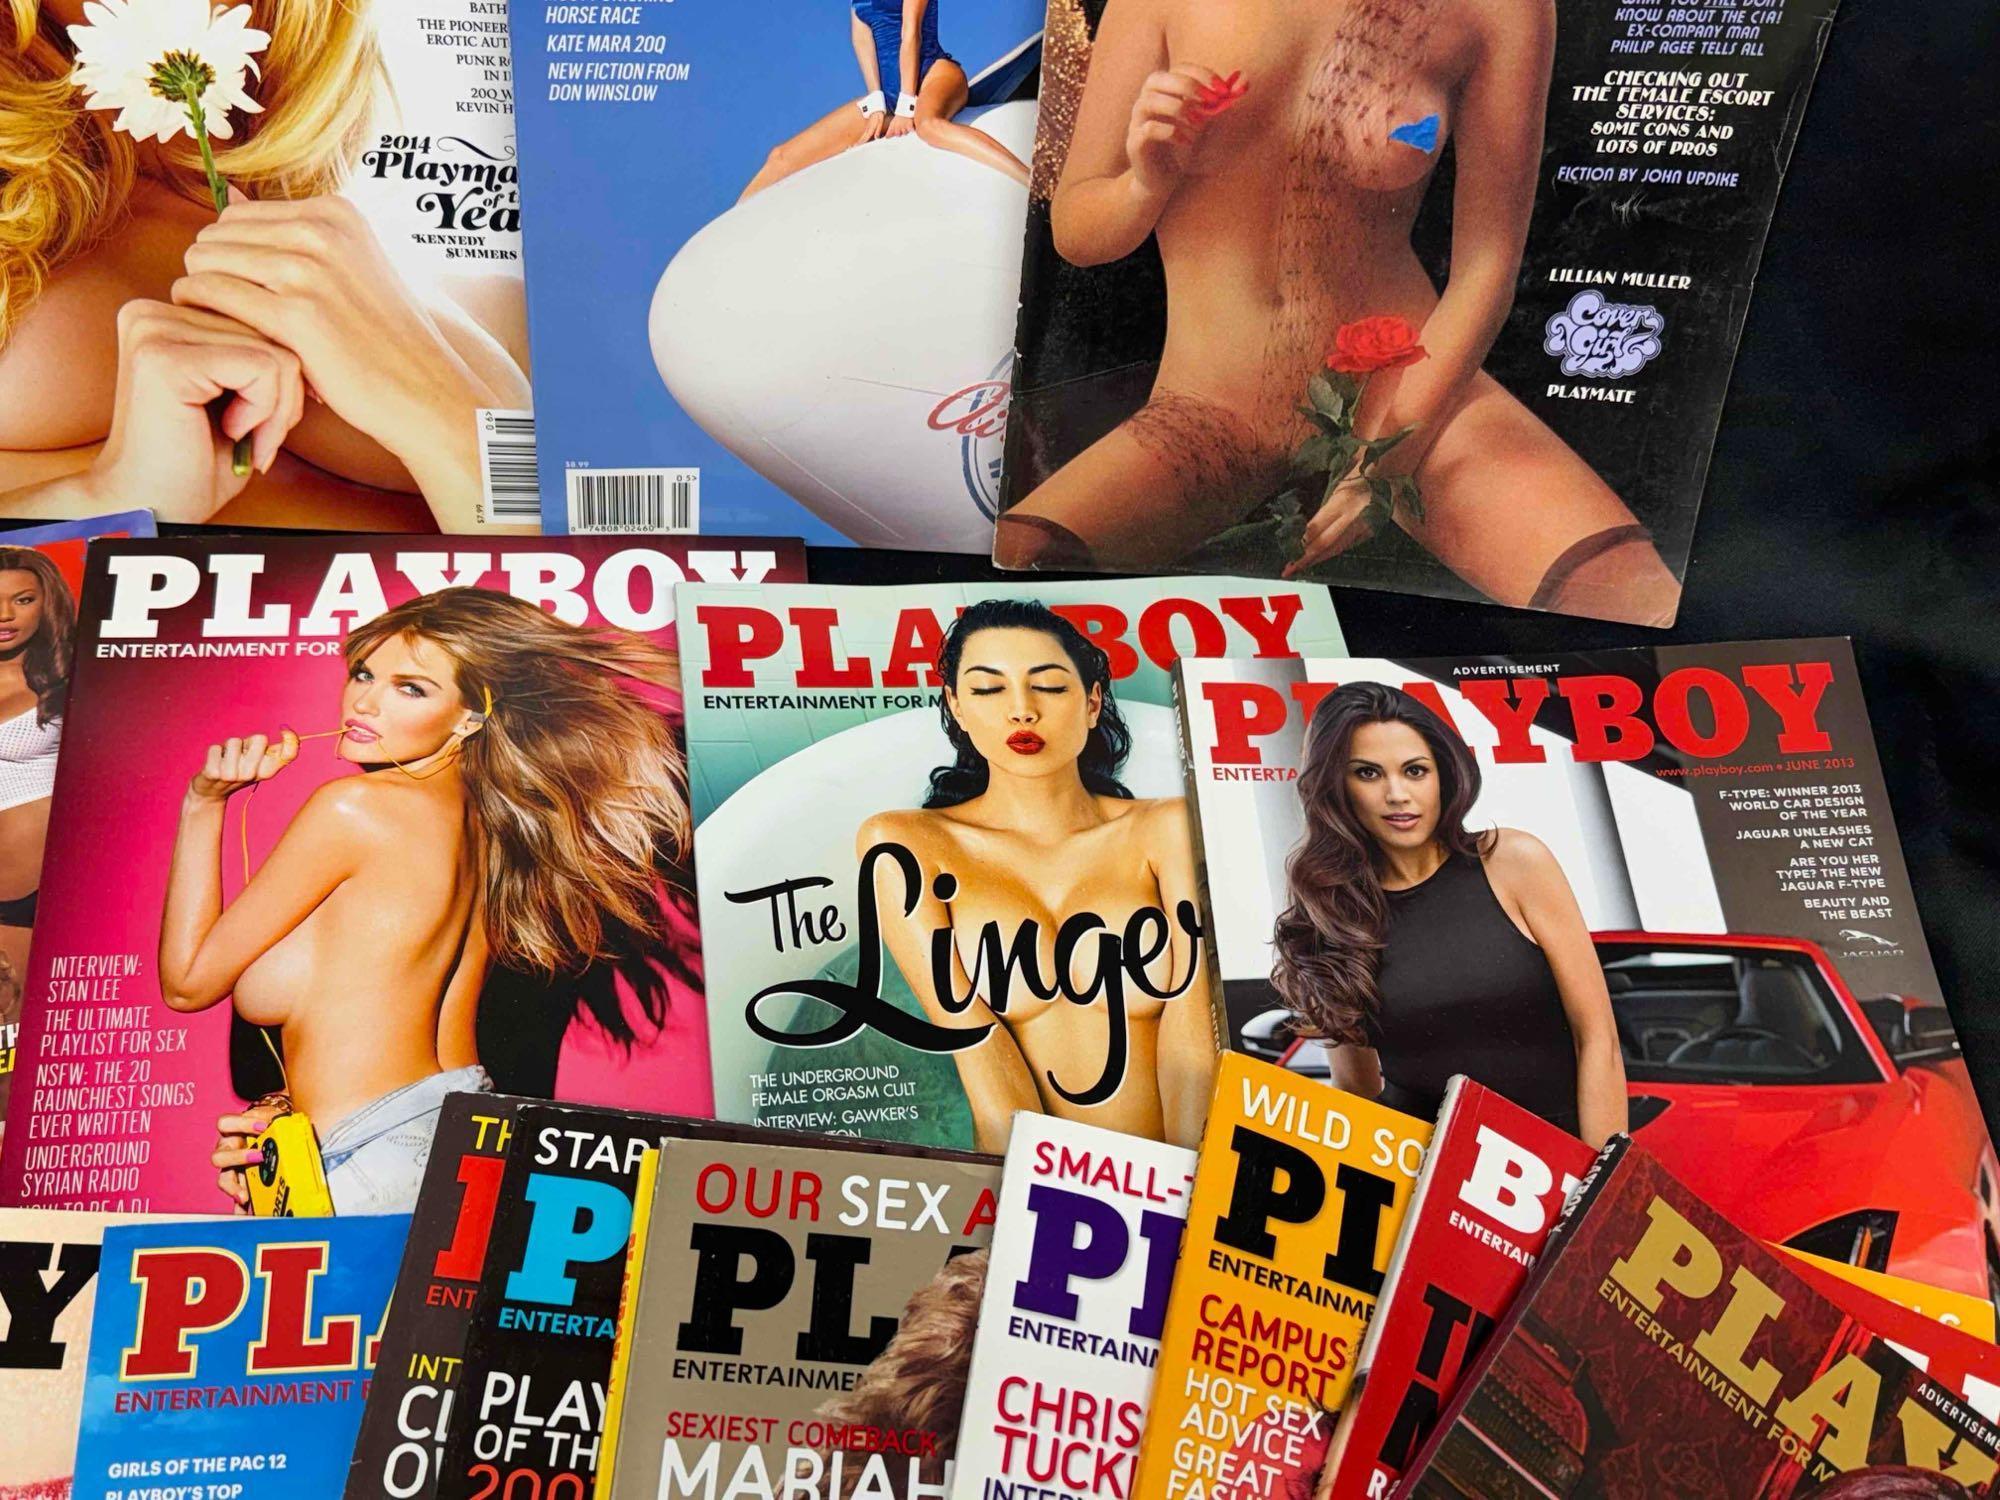 Approximately 20 Playboy Magazines Various Years 1970s-2000s